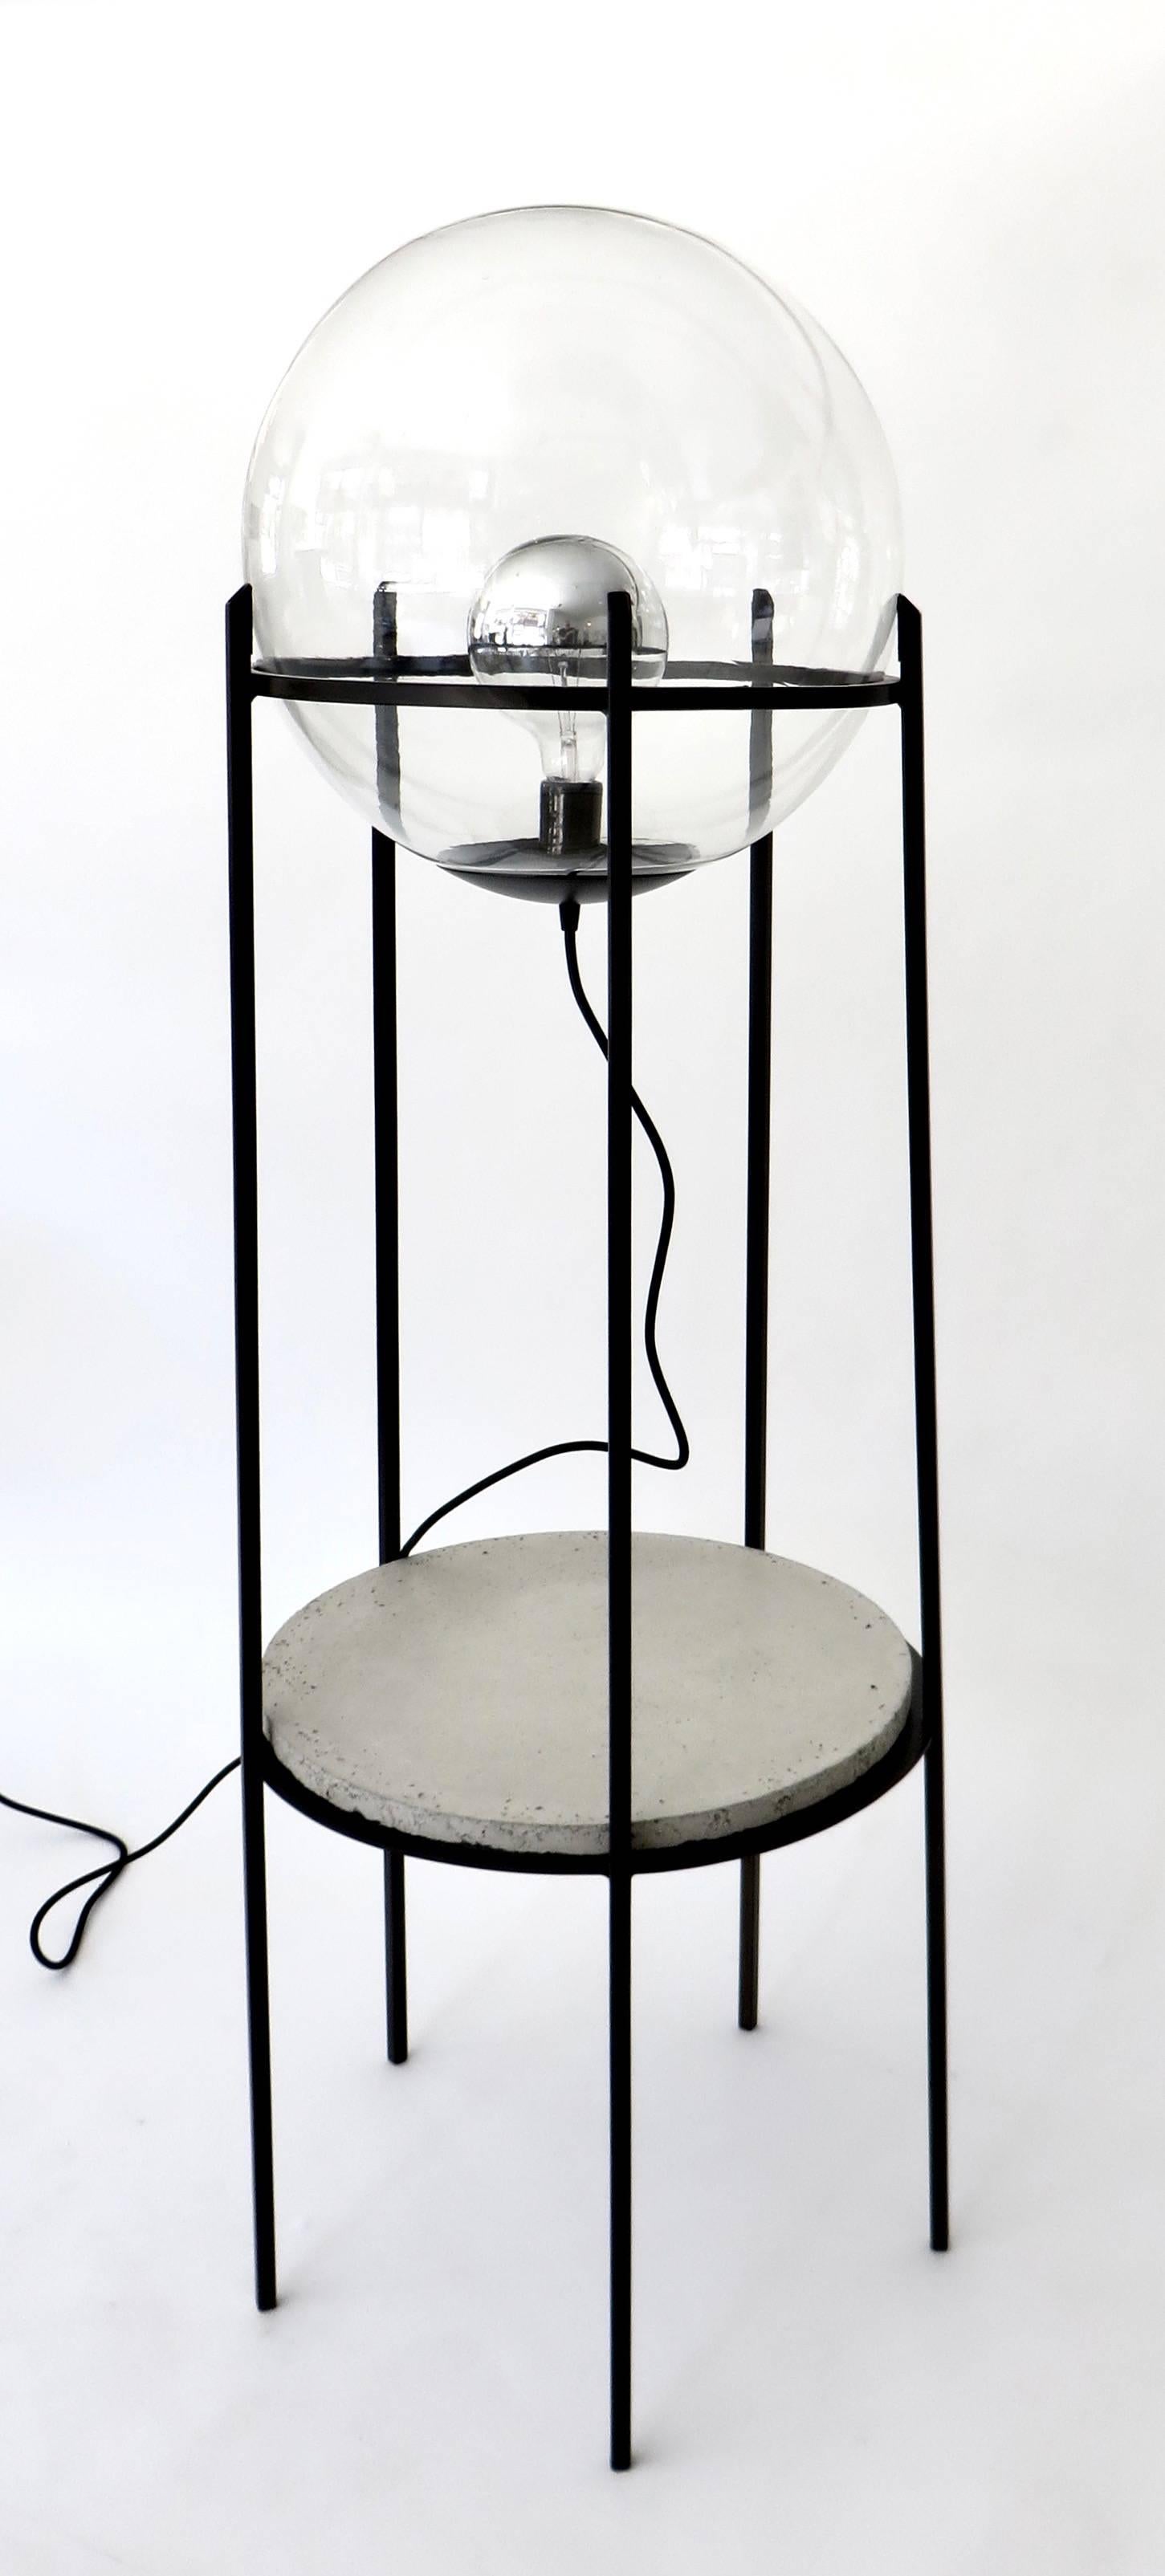 Two level lamp by contemporary artist and designer Hannah Vaughn.
Clear glass globe, cement plateau, and hand-wrought iron structure.
Edition of ten. This is #3 in the edition. 2016. Signed on underside of cement plateau

Hannah Vaughan was born